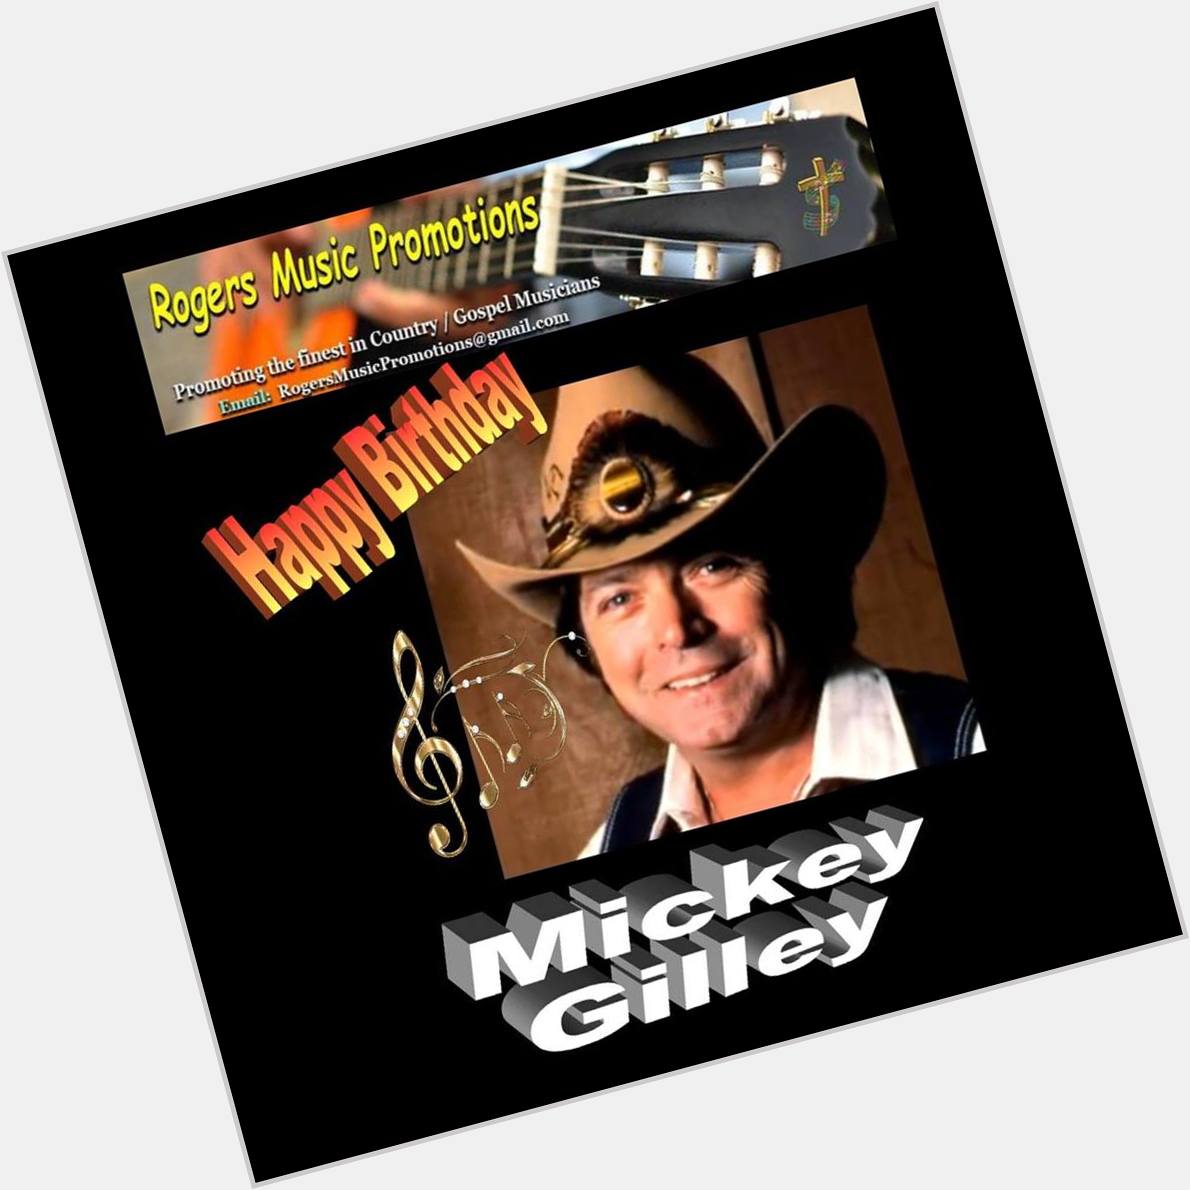 Happy Birthday Today To Mickey Gilley 1980s with the success of Urban Cowboy 